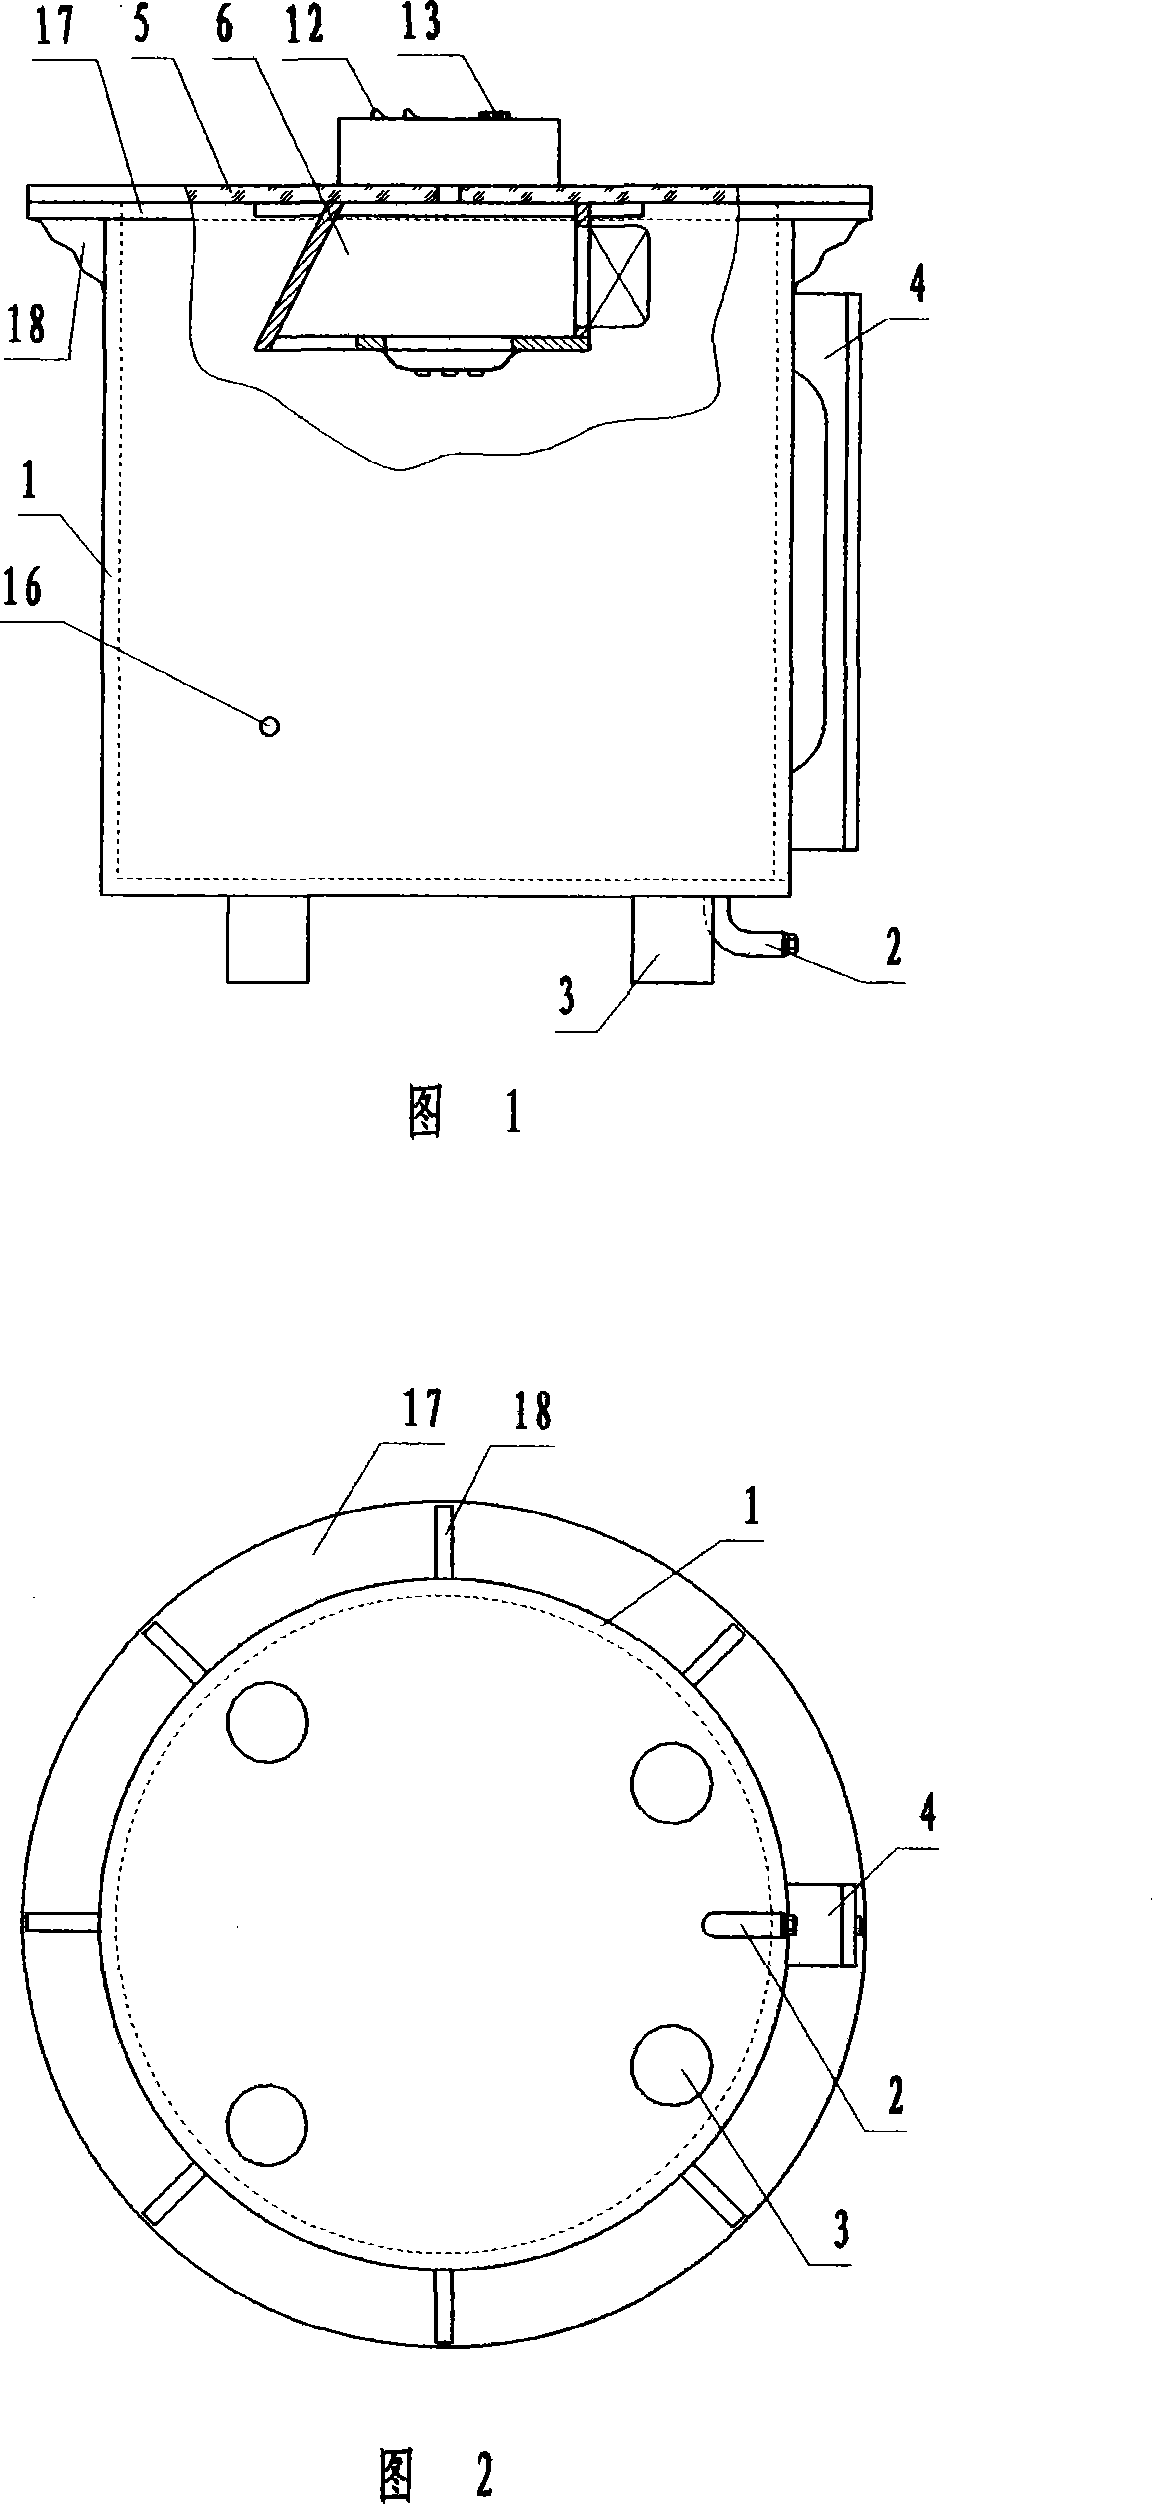 Modified type static inhalation toxicant exposure cabinet